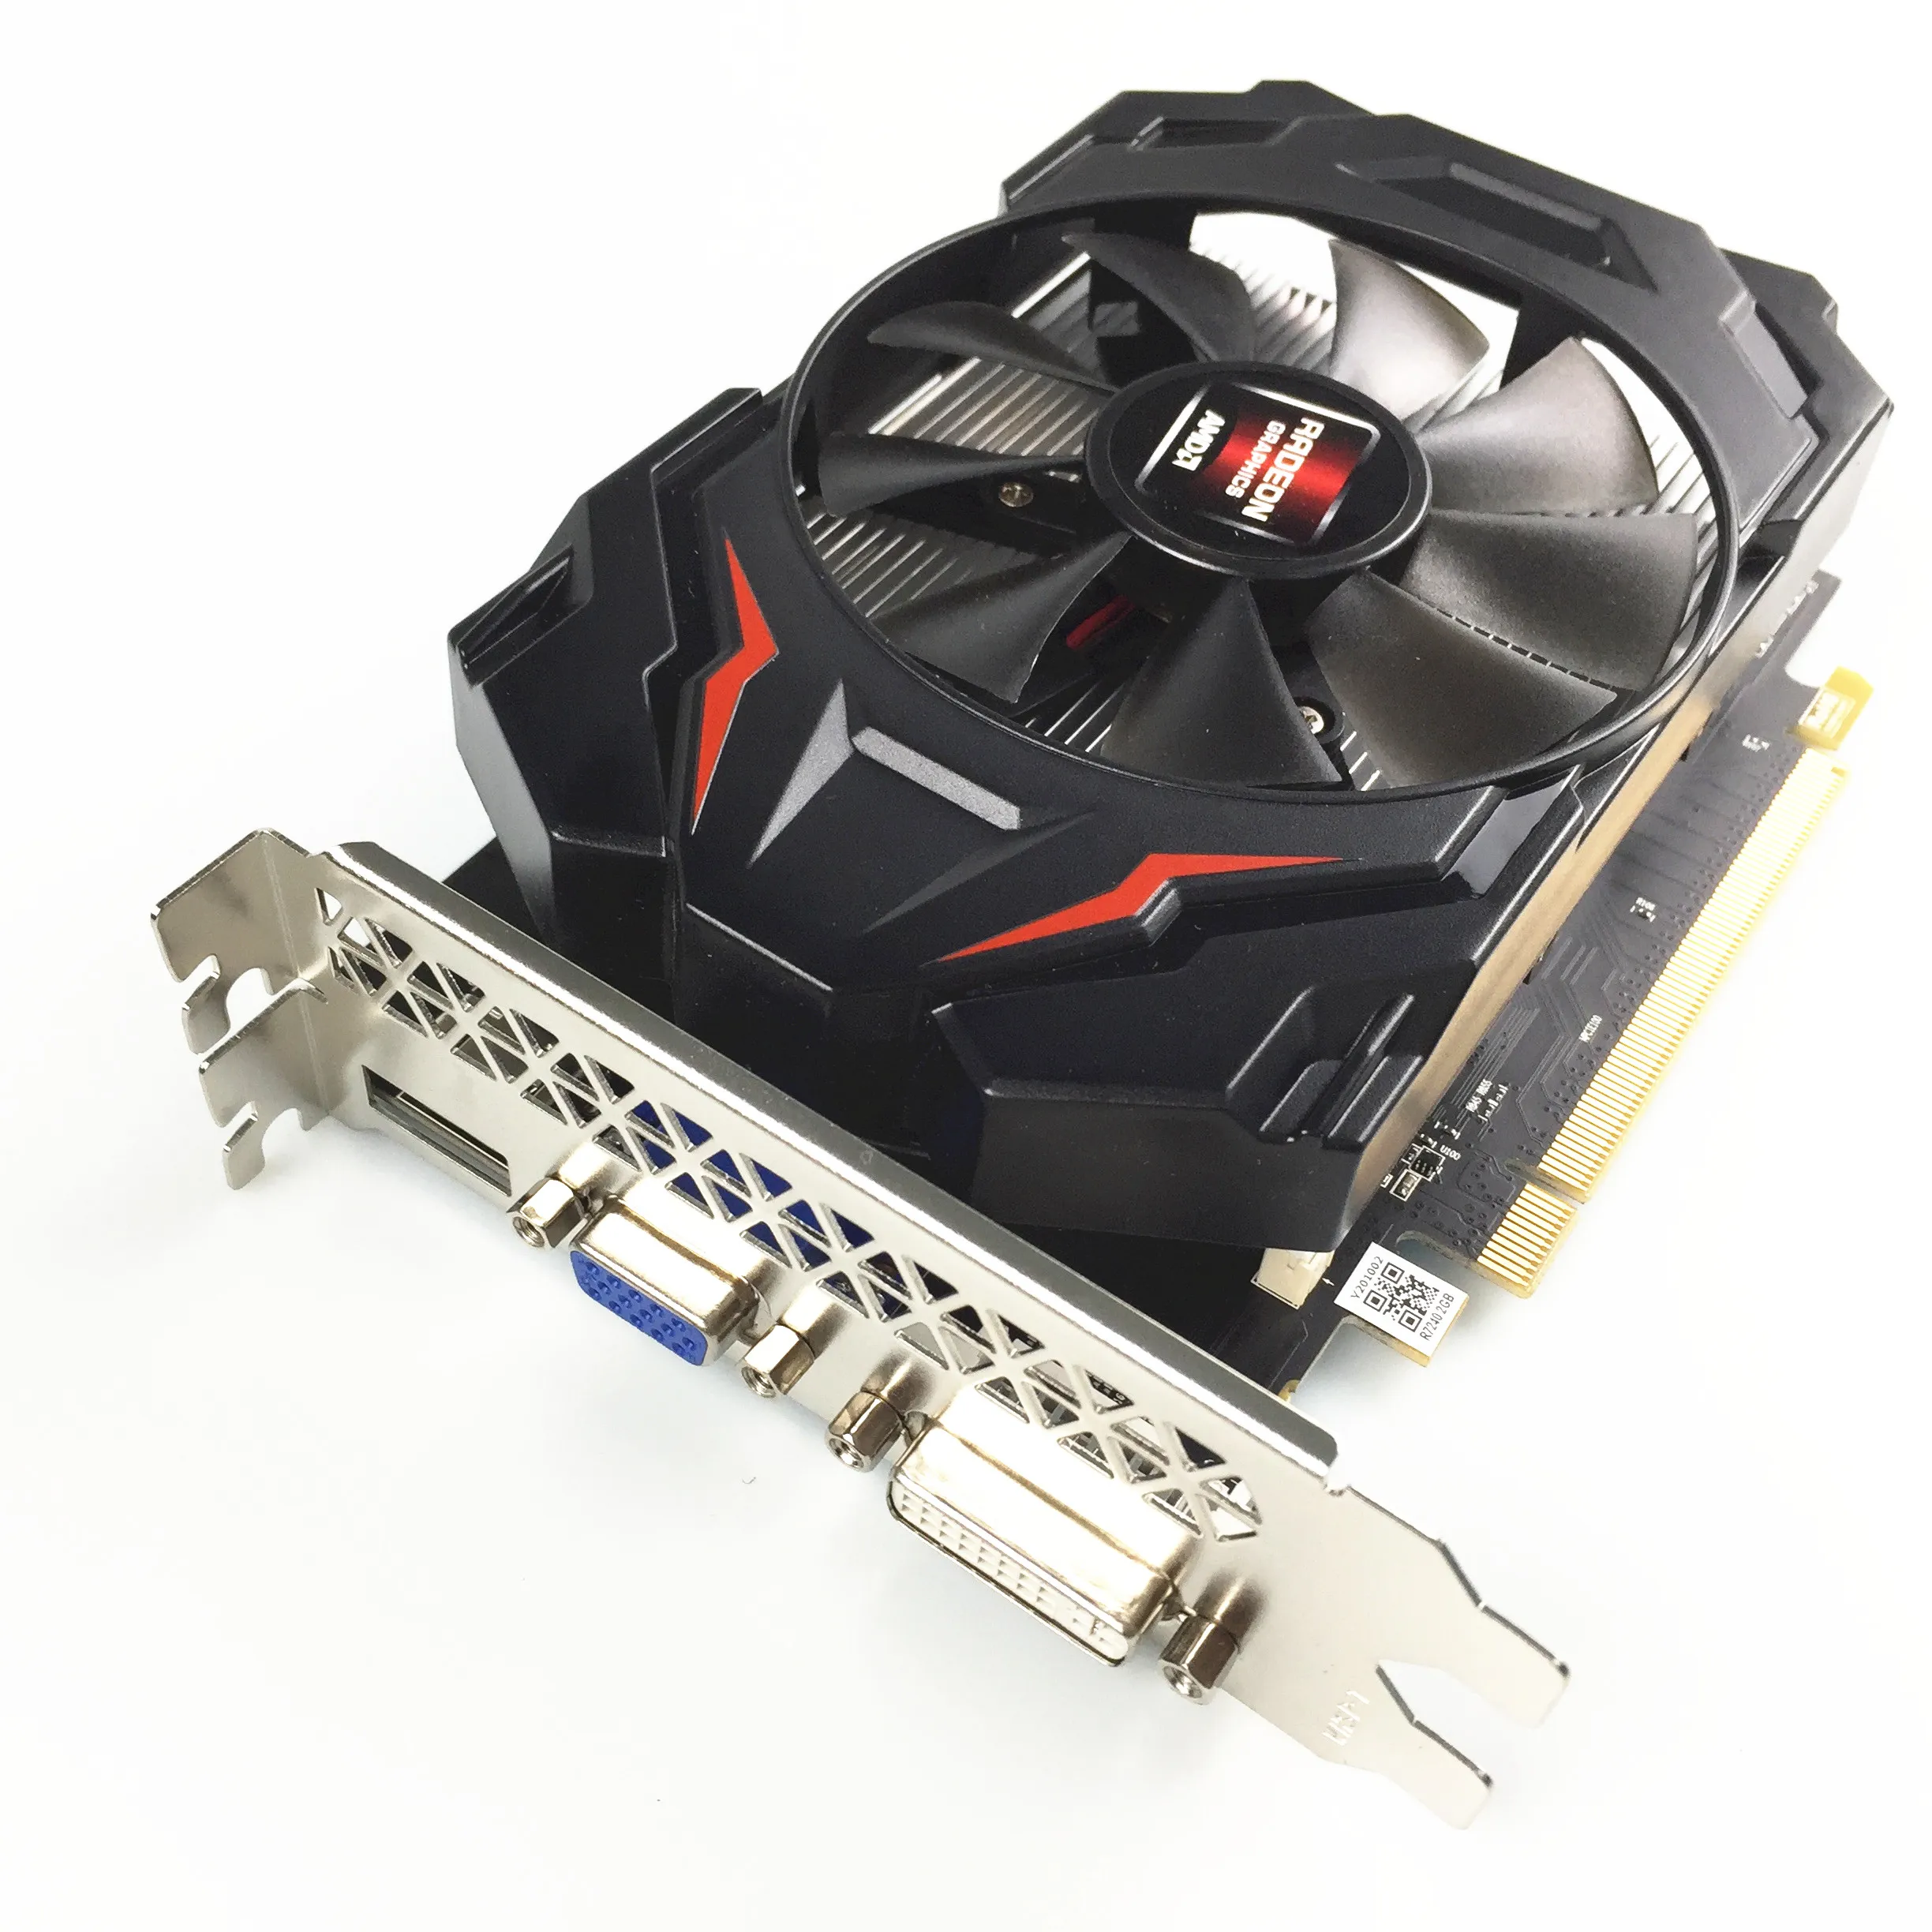 China wholesale price R7 350 2gb ddr 5 graphic card